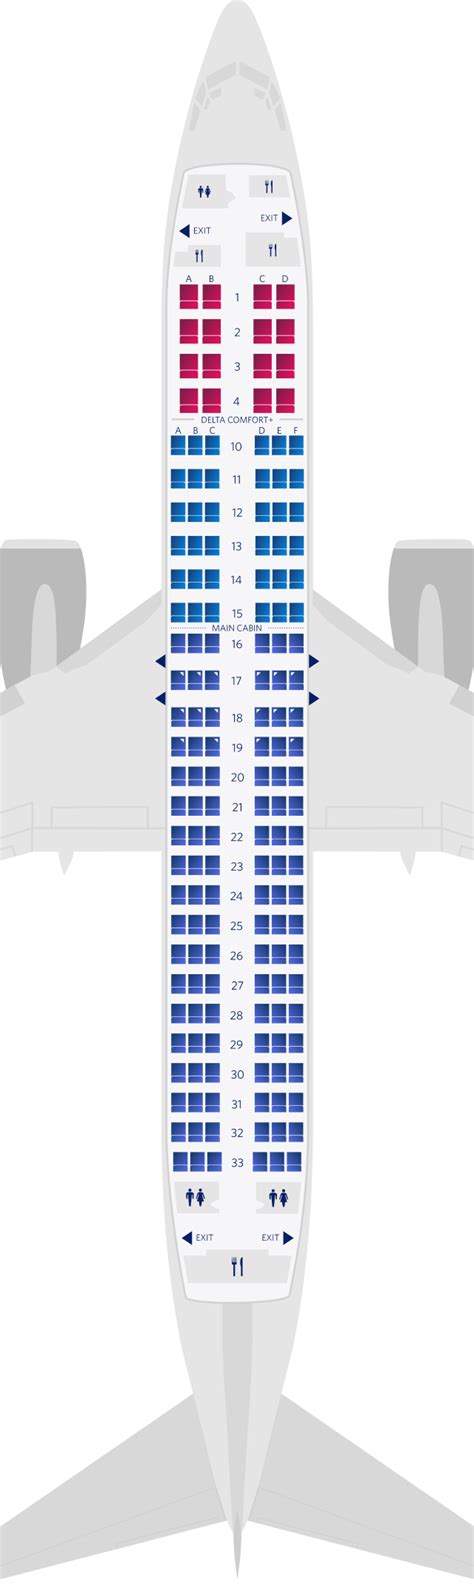 delta airlines seating chart   cabinets matttroy